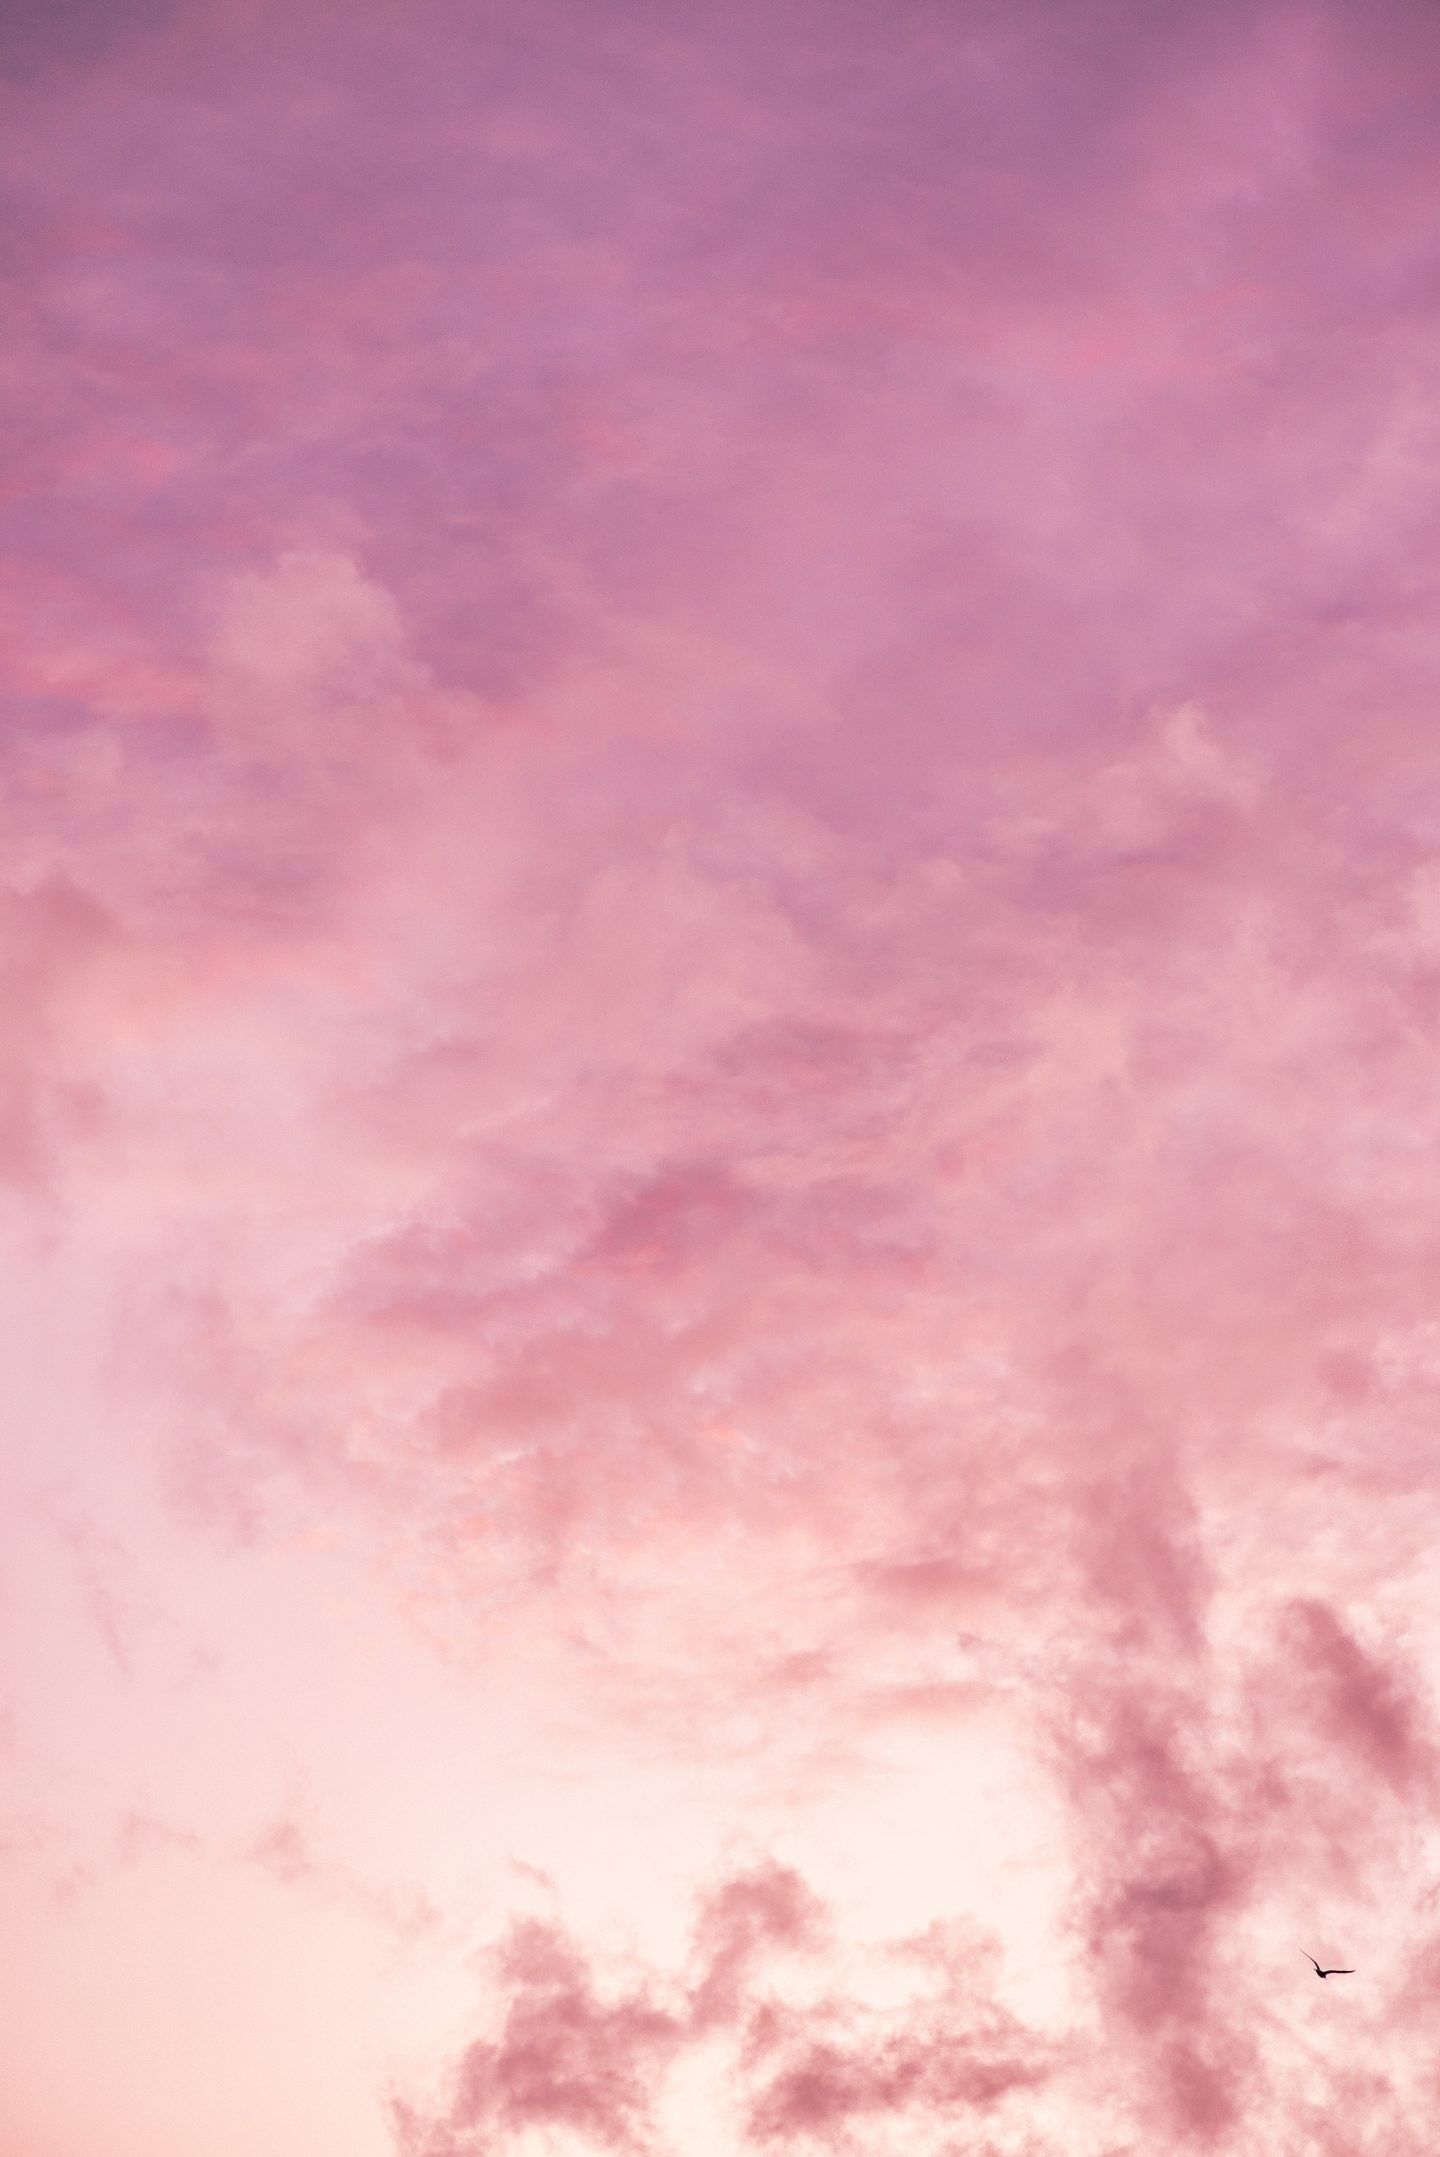 Cute Pink Wallpaper For iPhone That You'll Love